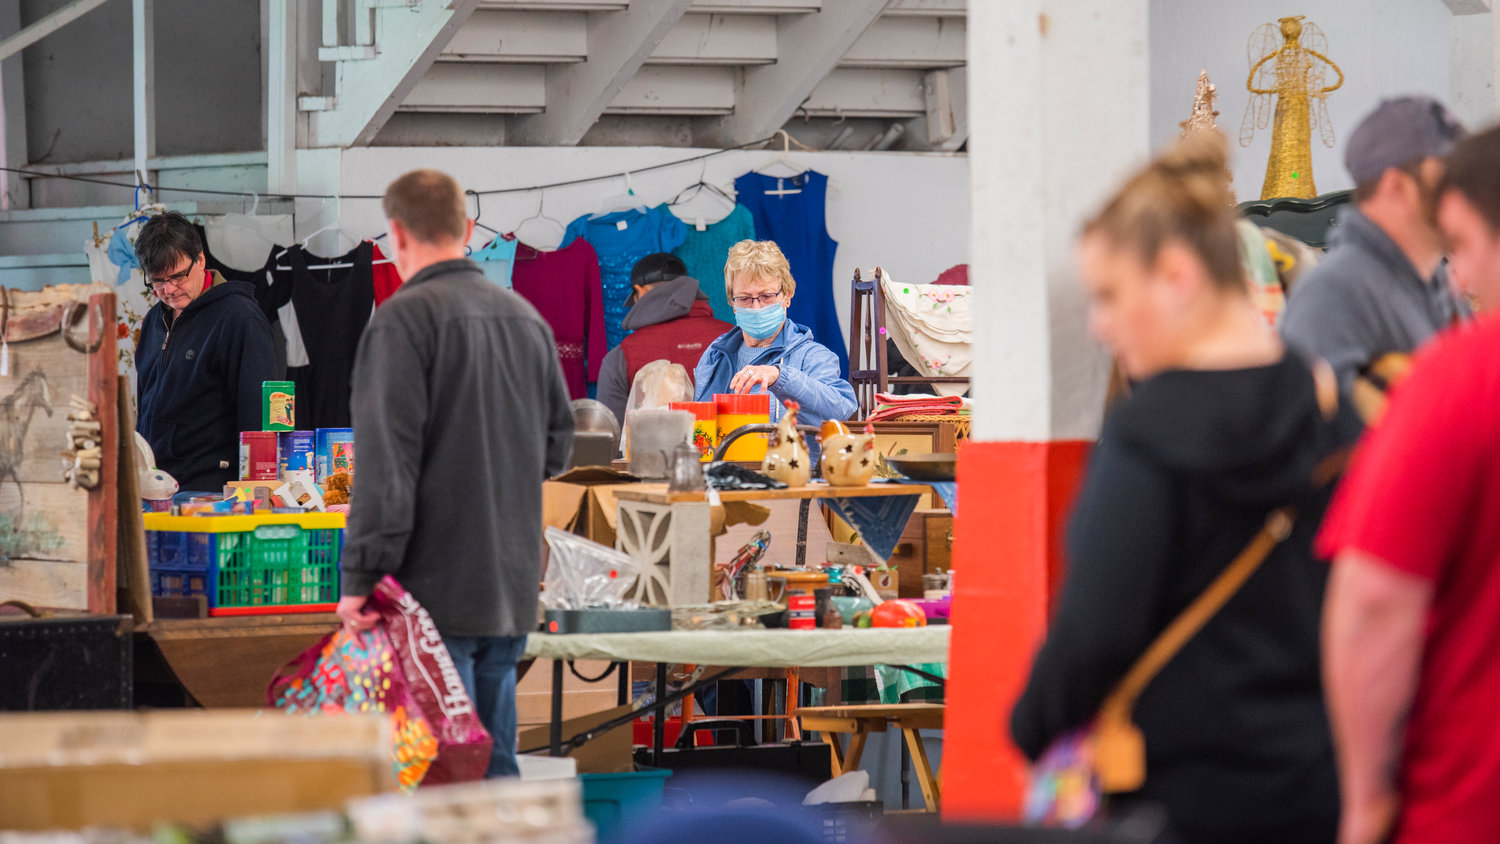 Shoppers hunt for deals at the Southwest Washington Fairgrounds in Centralia on Saturday during the Spring Community Garage Sale.